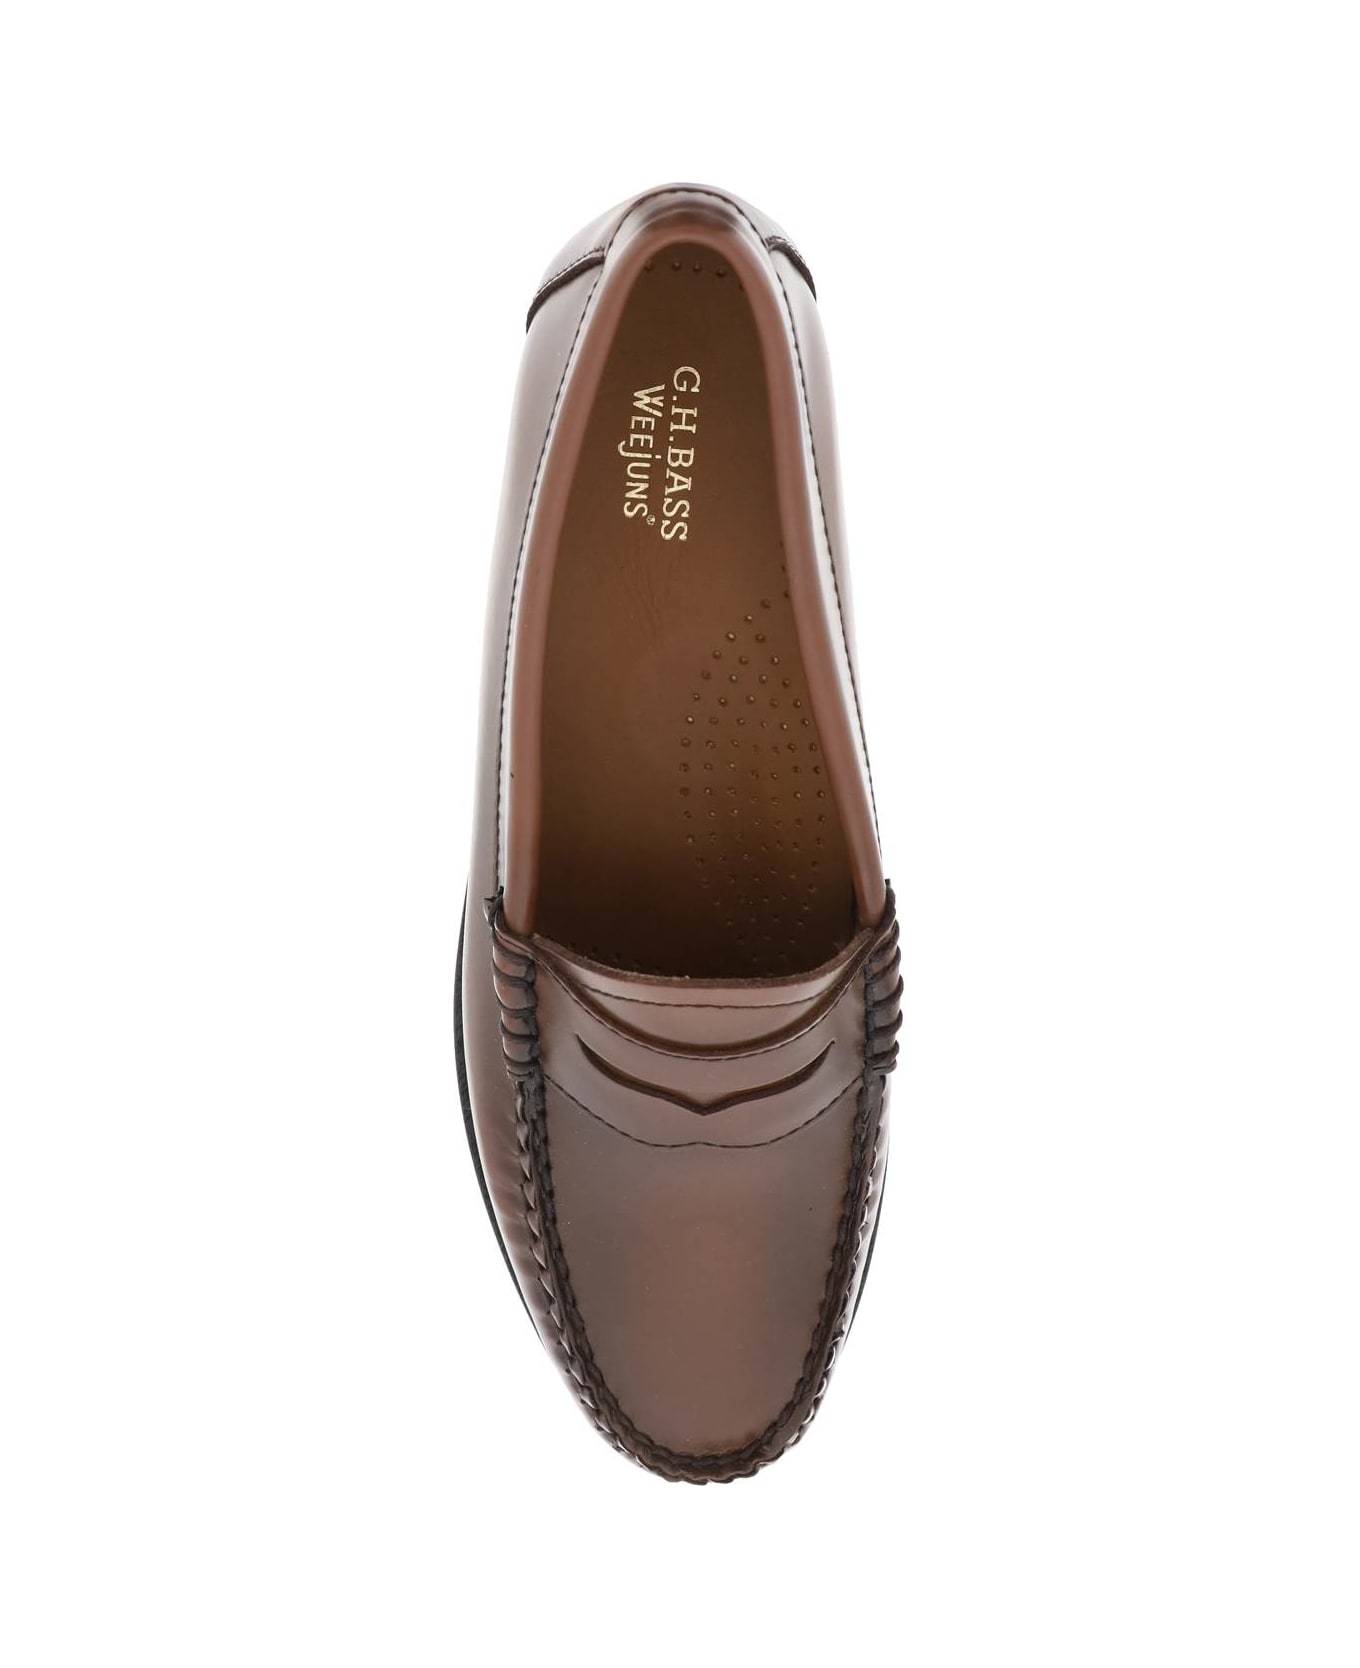 G.H.Bass & Co. 'weejuns' Penny Loafers - COGNAC (Brown)